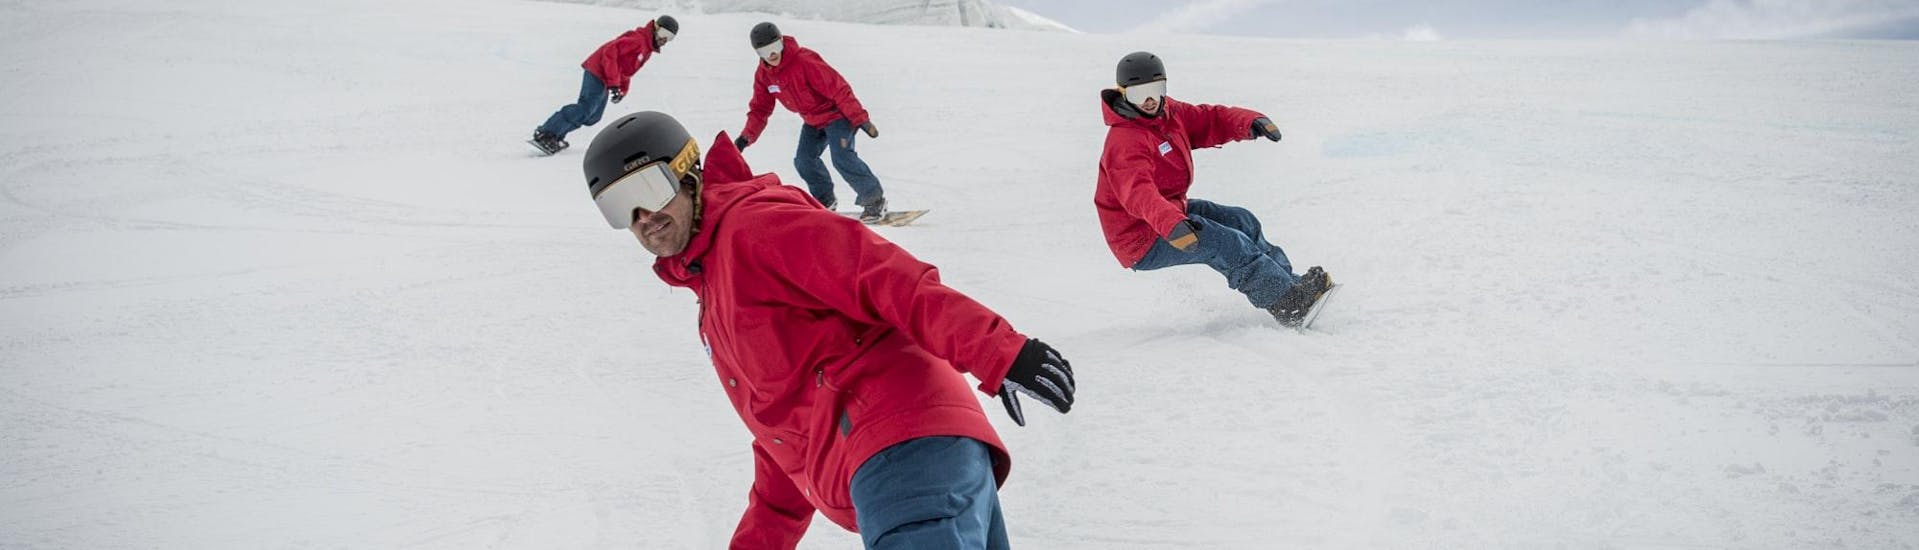 Snowboarding Lessons (6-16 y.) for Adv. Boarders - Full Day with Swiss Ski School Samnaun - Hero image